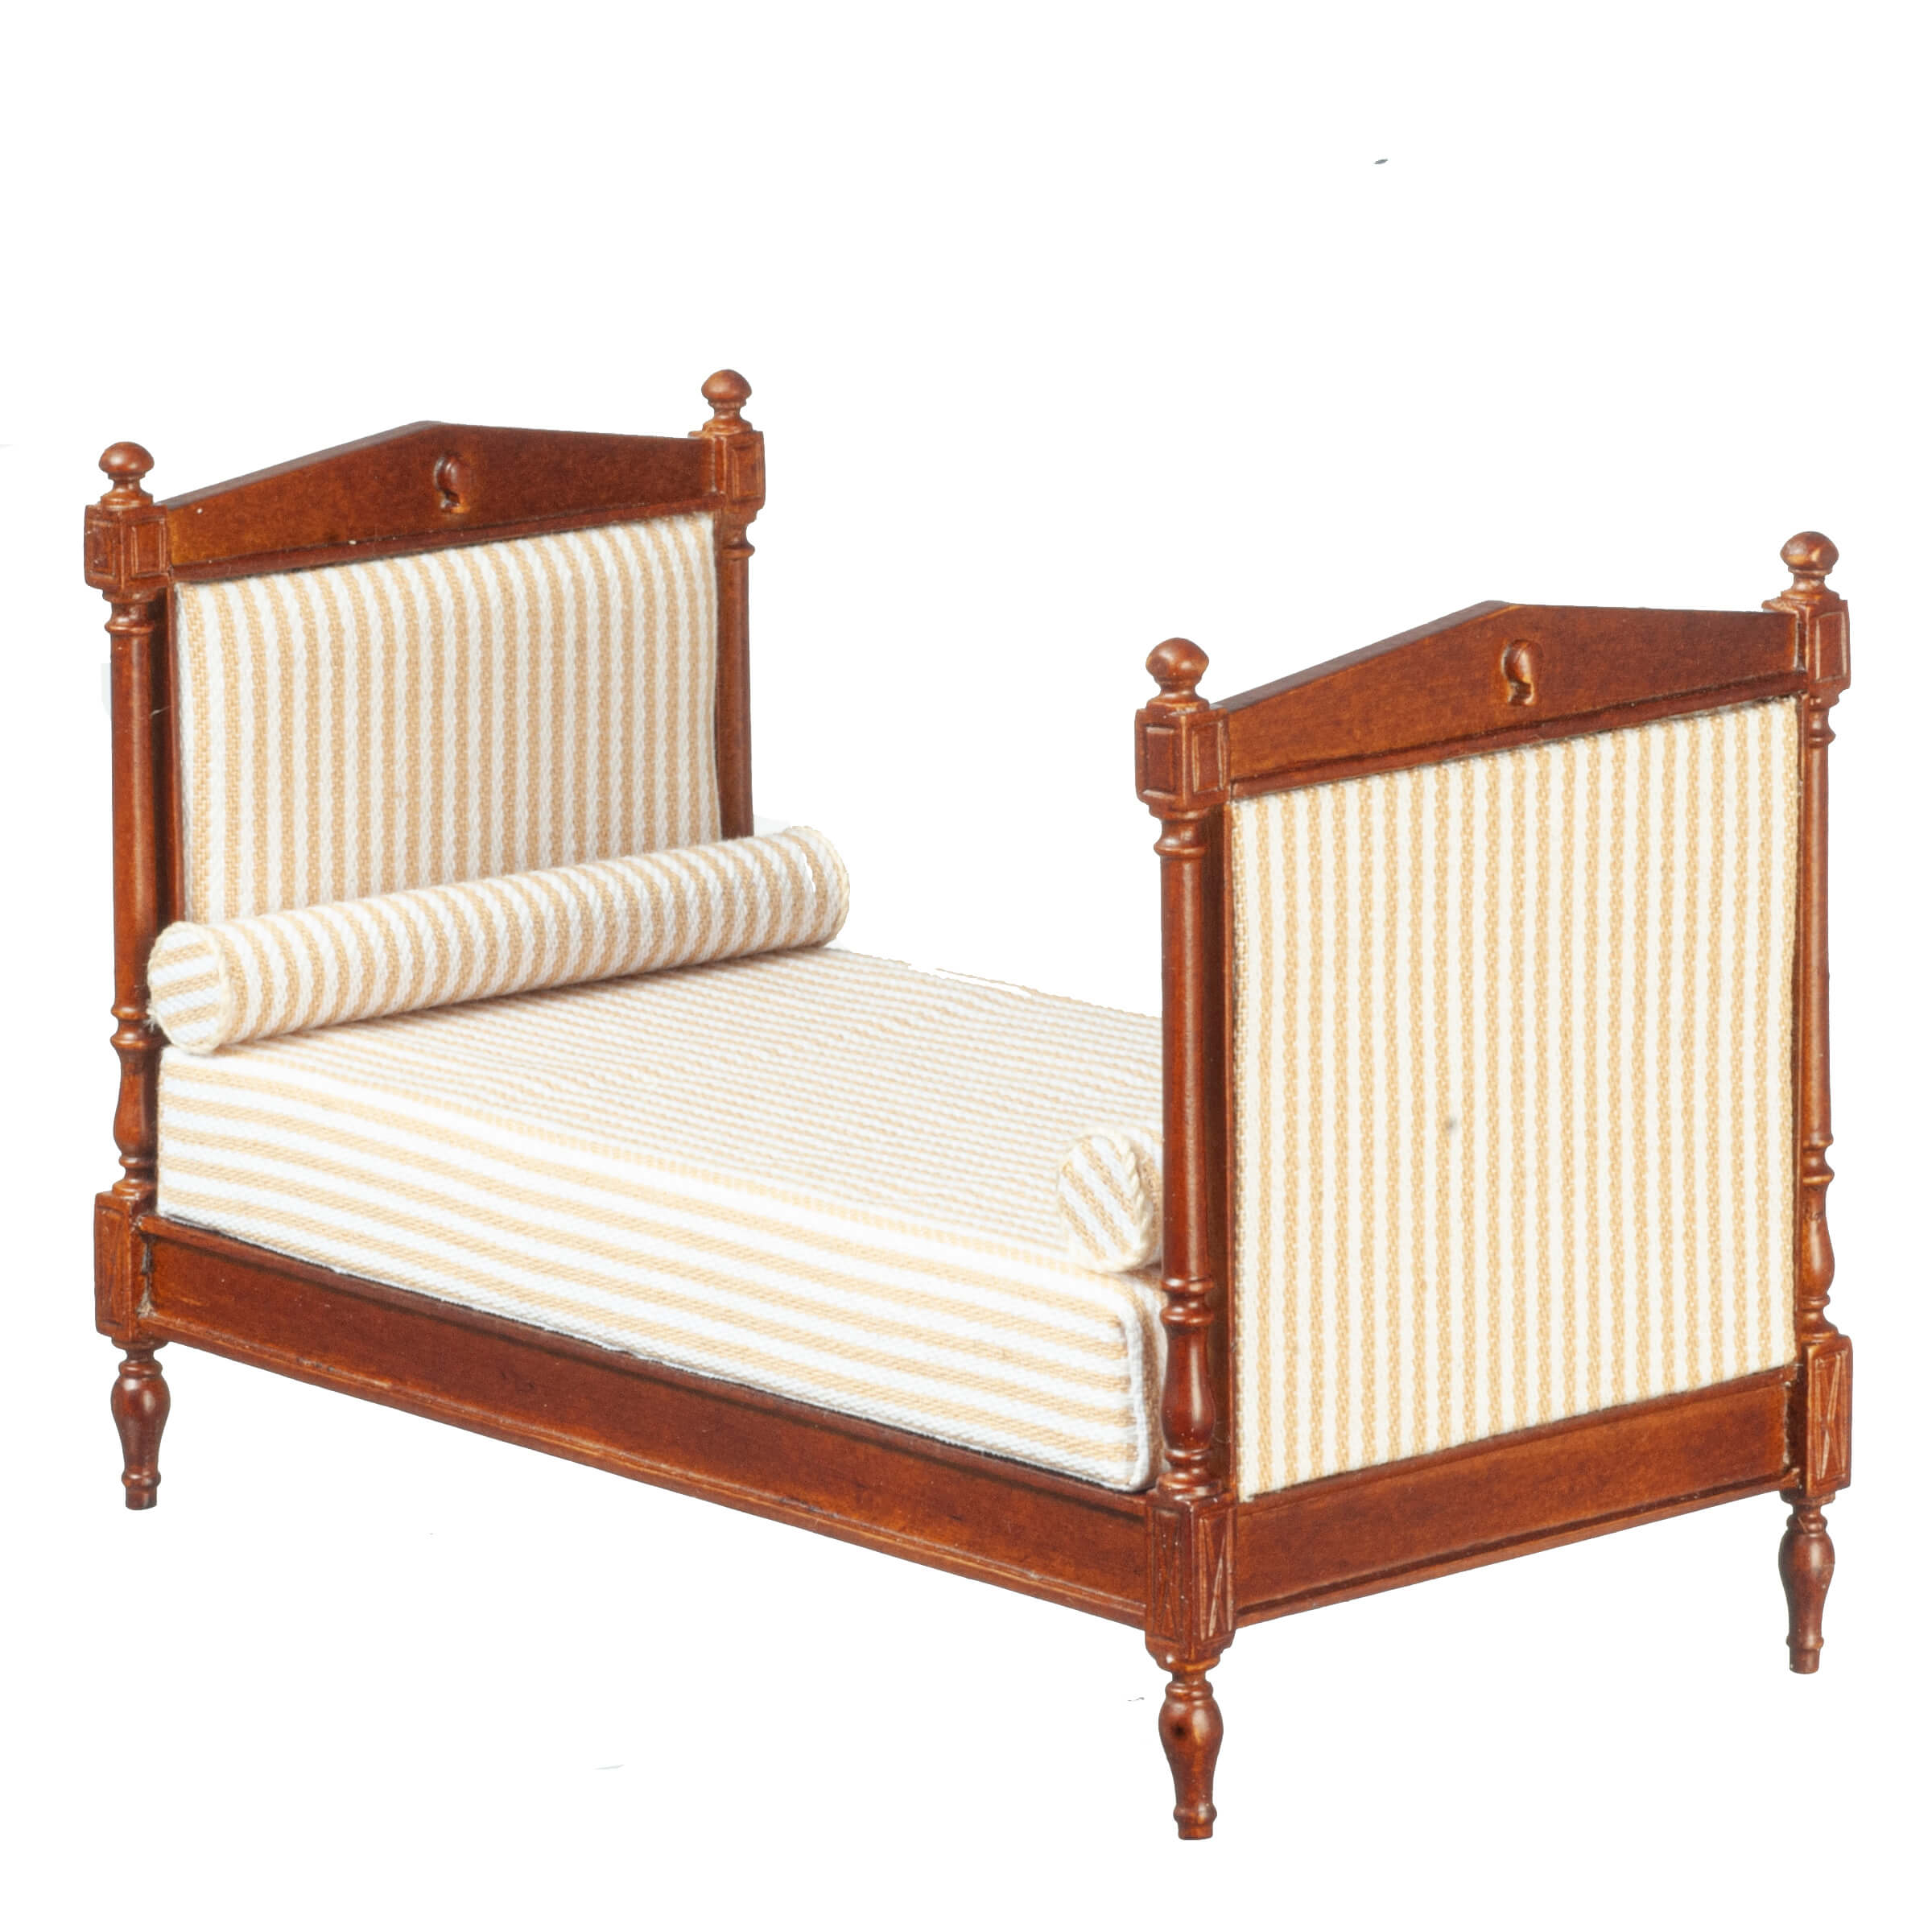 Double Ended Daybed - Walnut